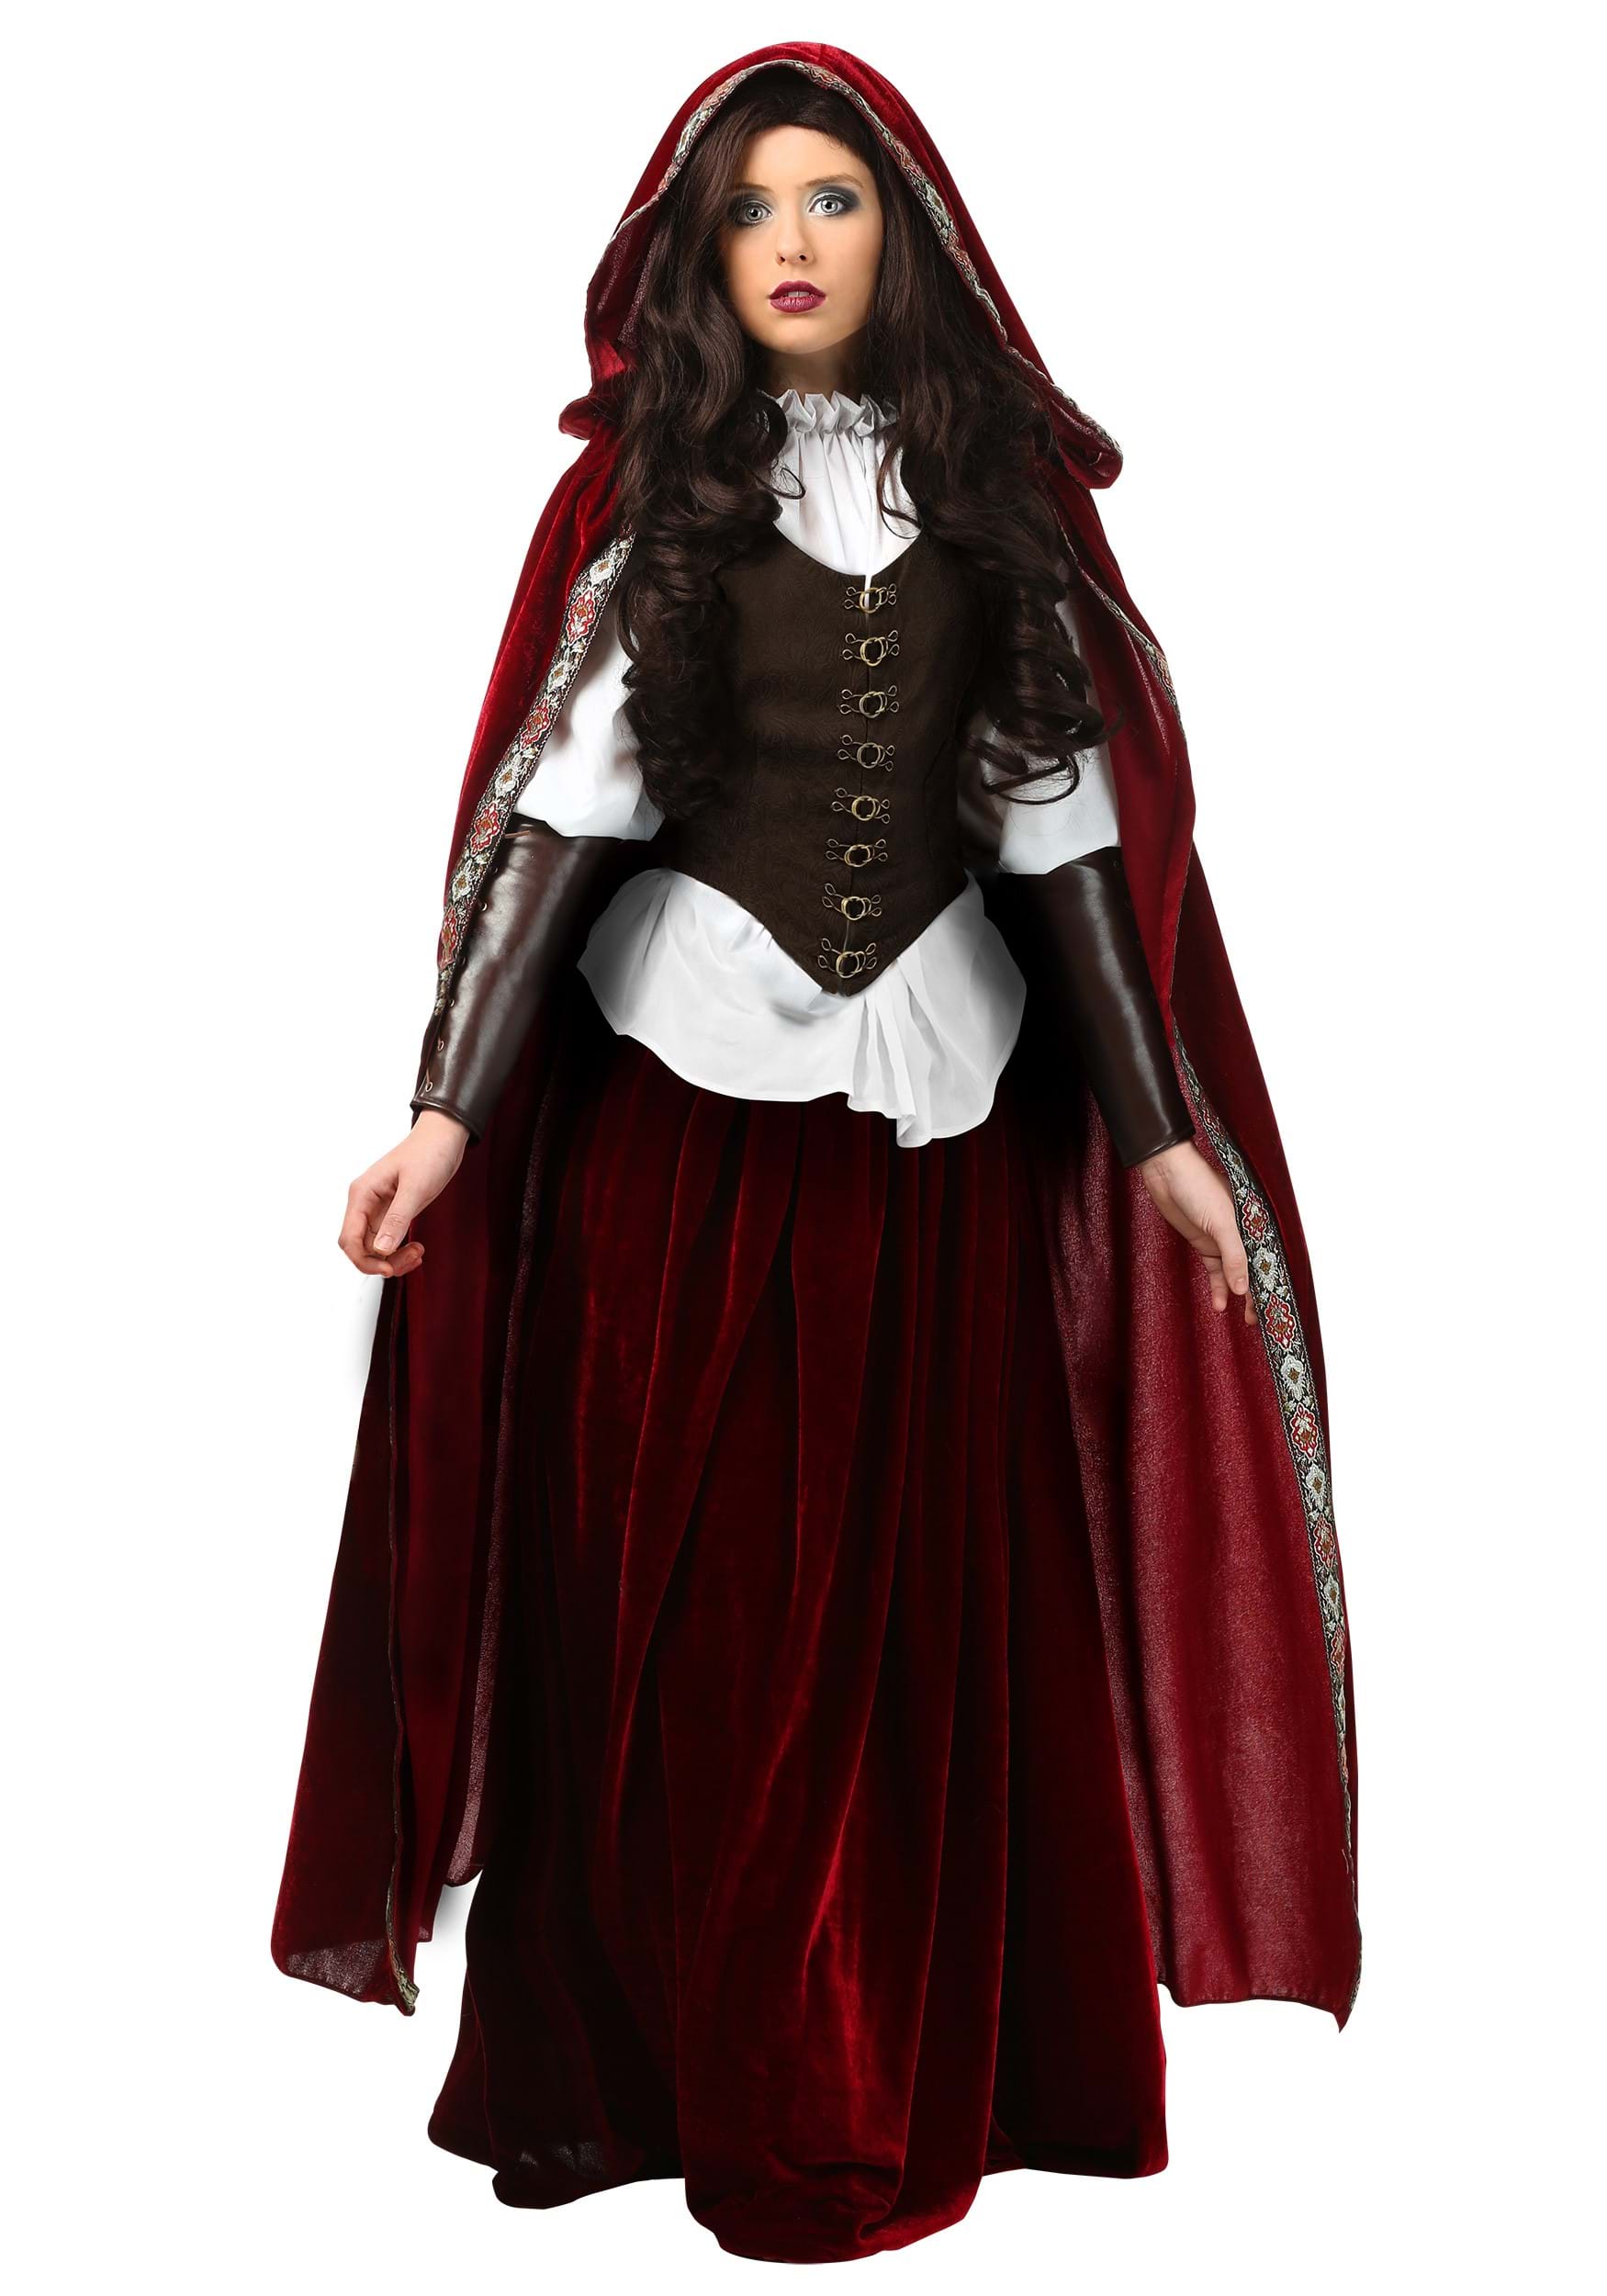 Photos - Fancy Dress Deluxe FUN Costumes  Red Riding Hood Costume for Women Brown/Red/Wh 